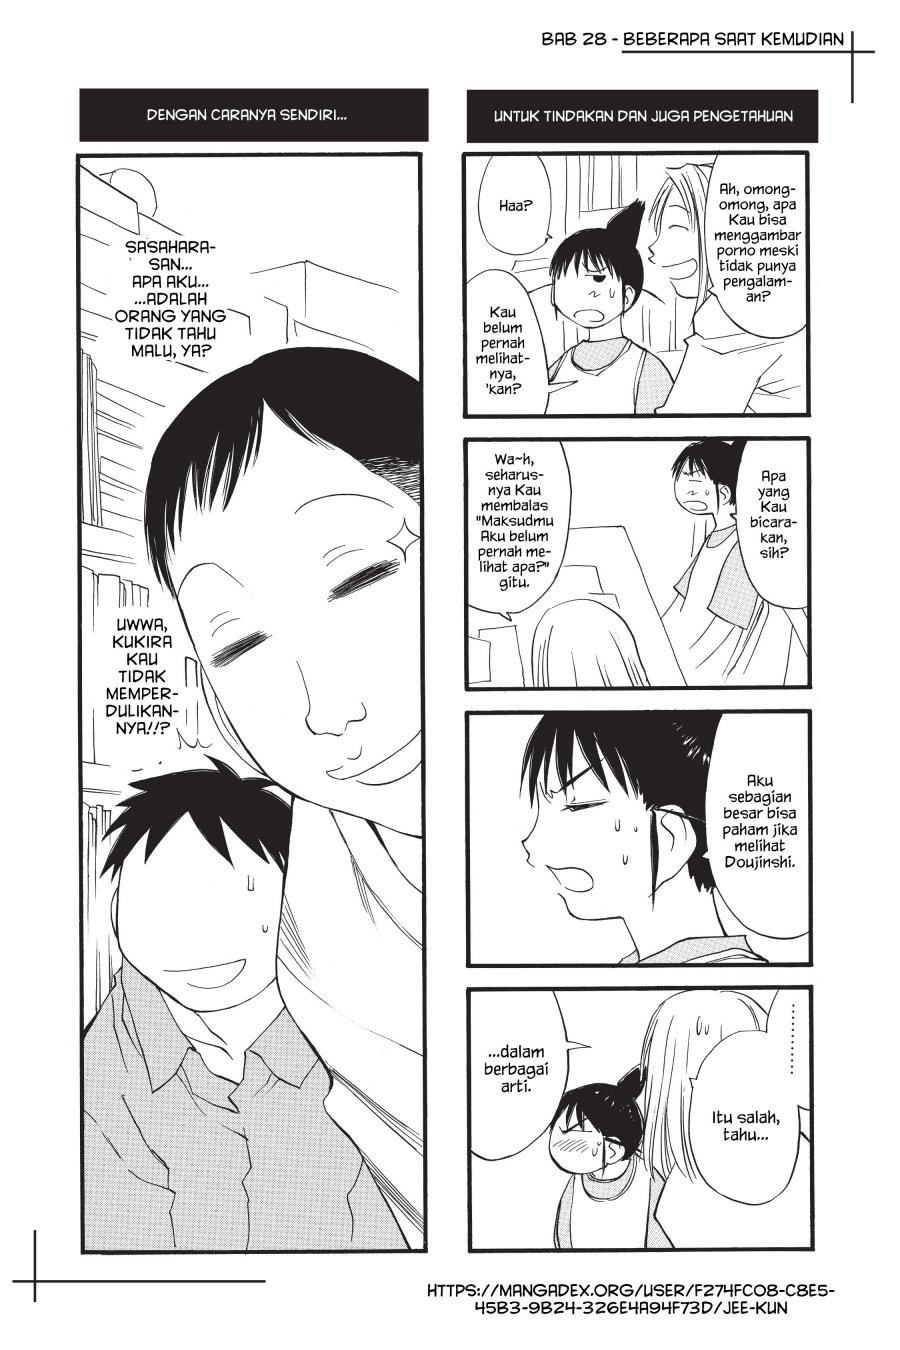 Genshiken – The Society for the Study of Modern Visual Culture Chapter 28 Image 27